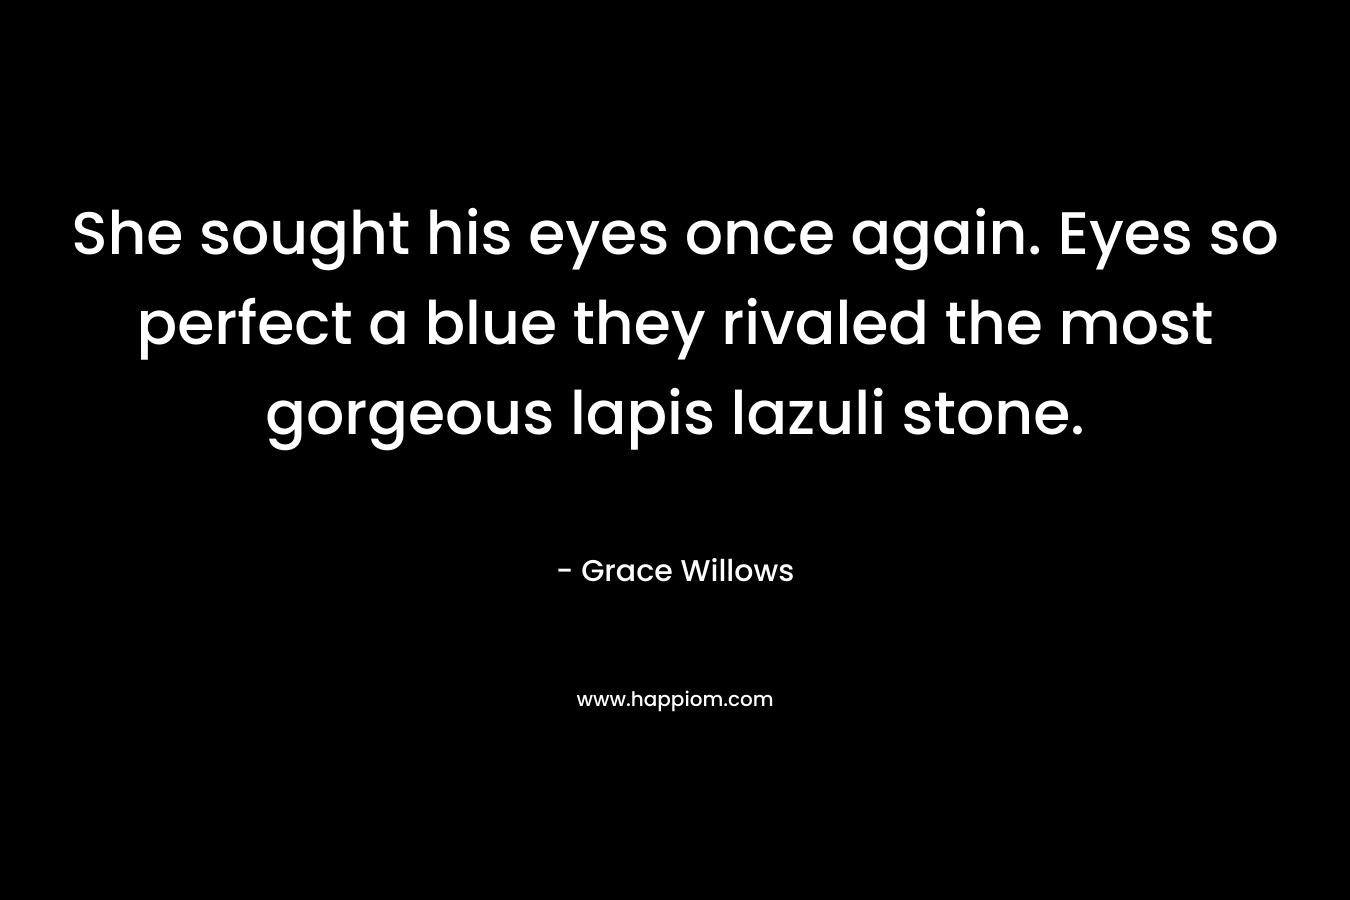 She sought his eyes once again. Eyes so perfect a blue they rivaled the most gorgeous lapis lazuli stone. – Grace Willows